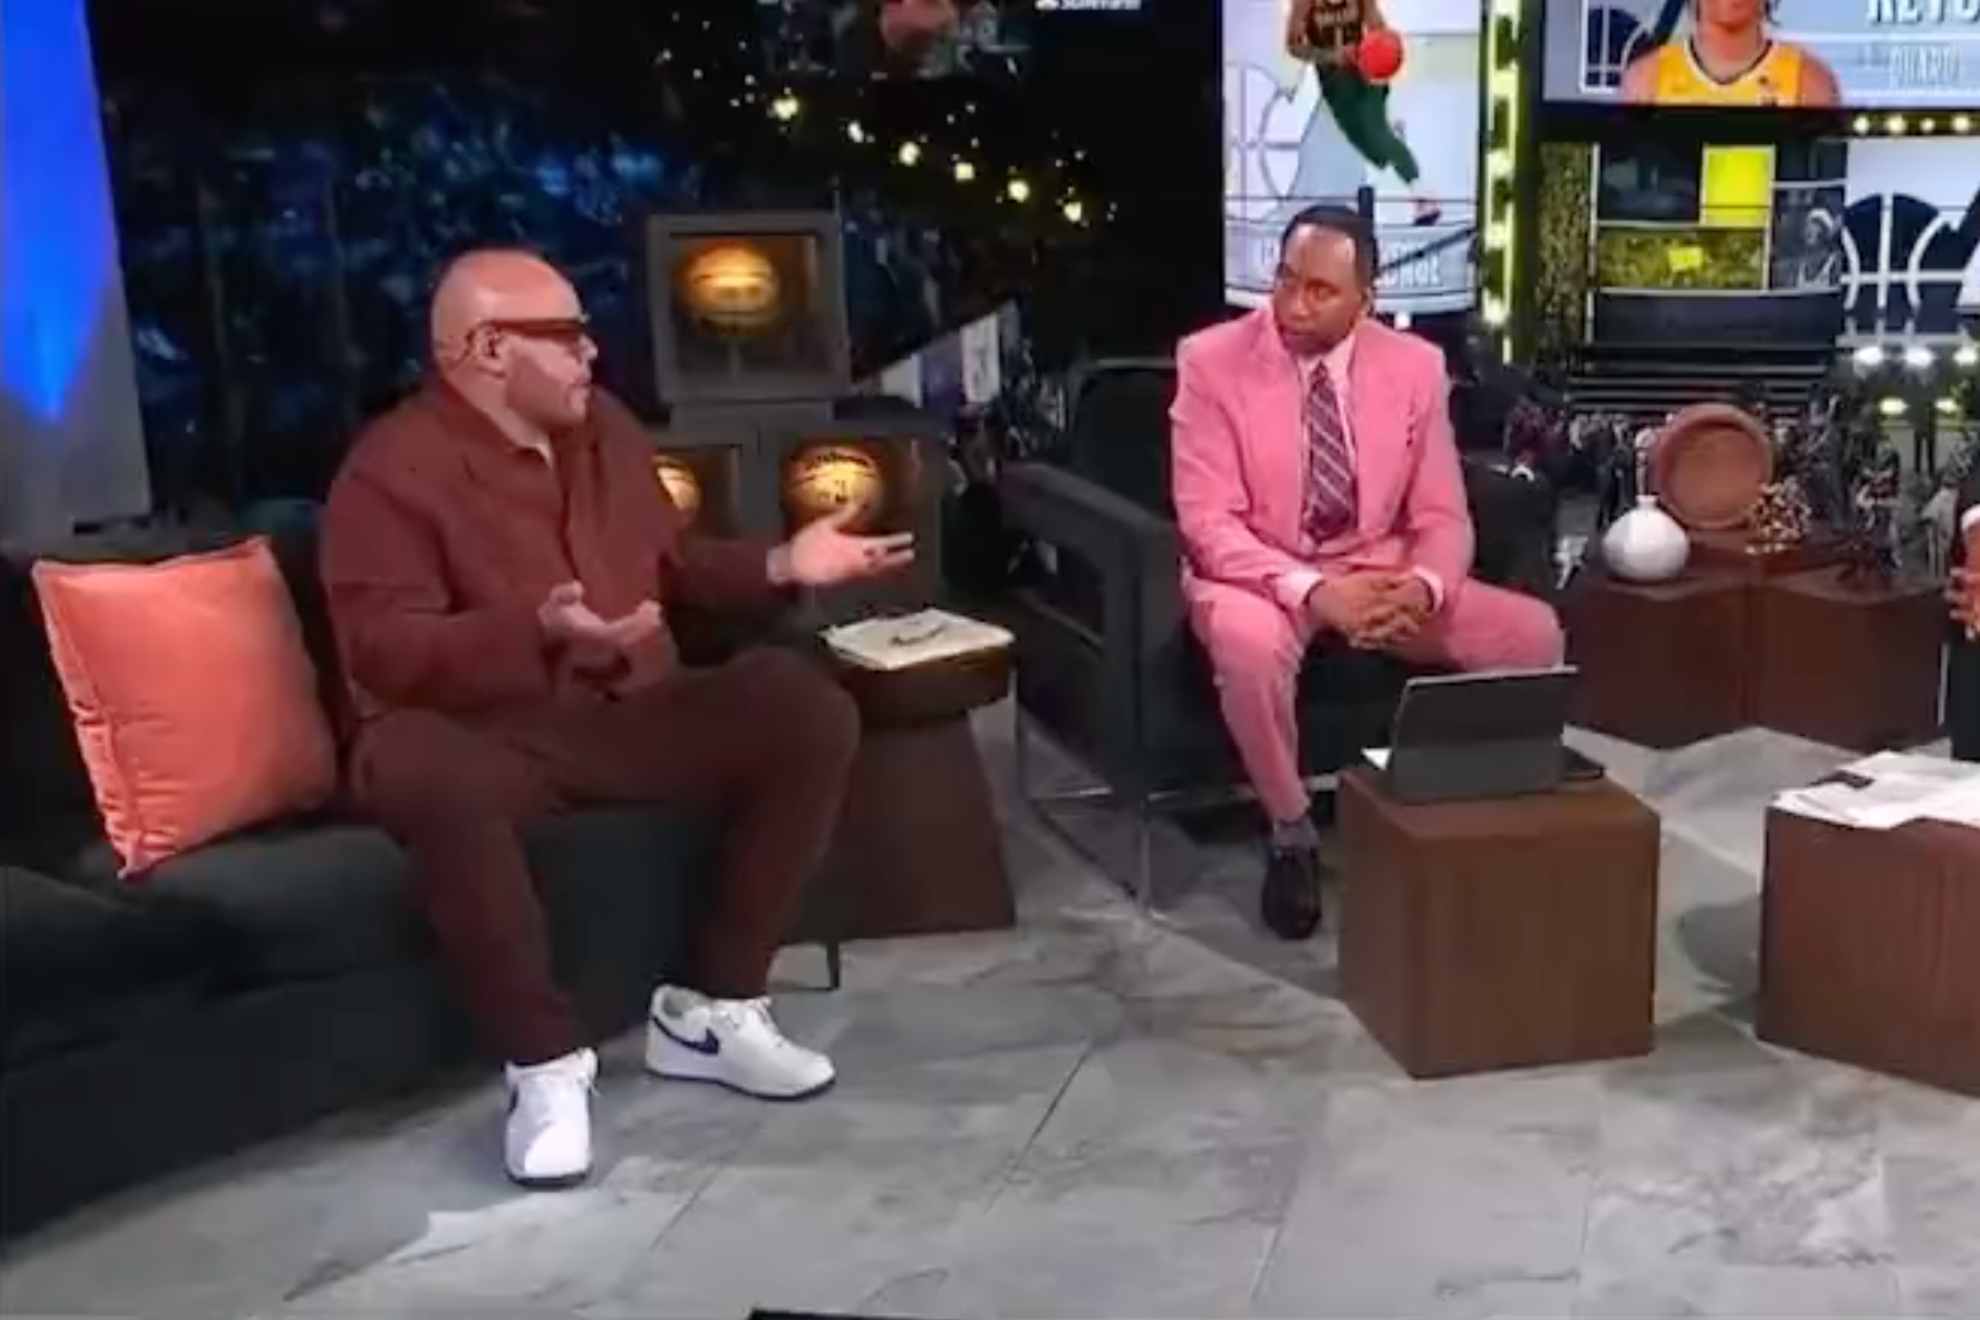 Fat Joe (left) speaks with Stephen A. Smith during ESPN's 2023 NBA Draft broadcast.